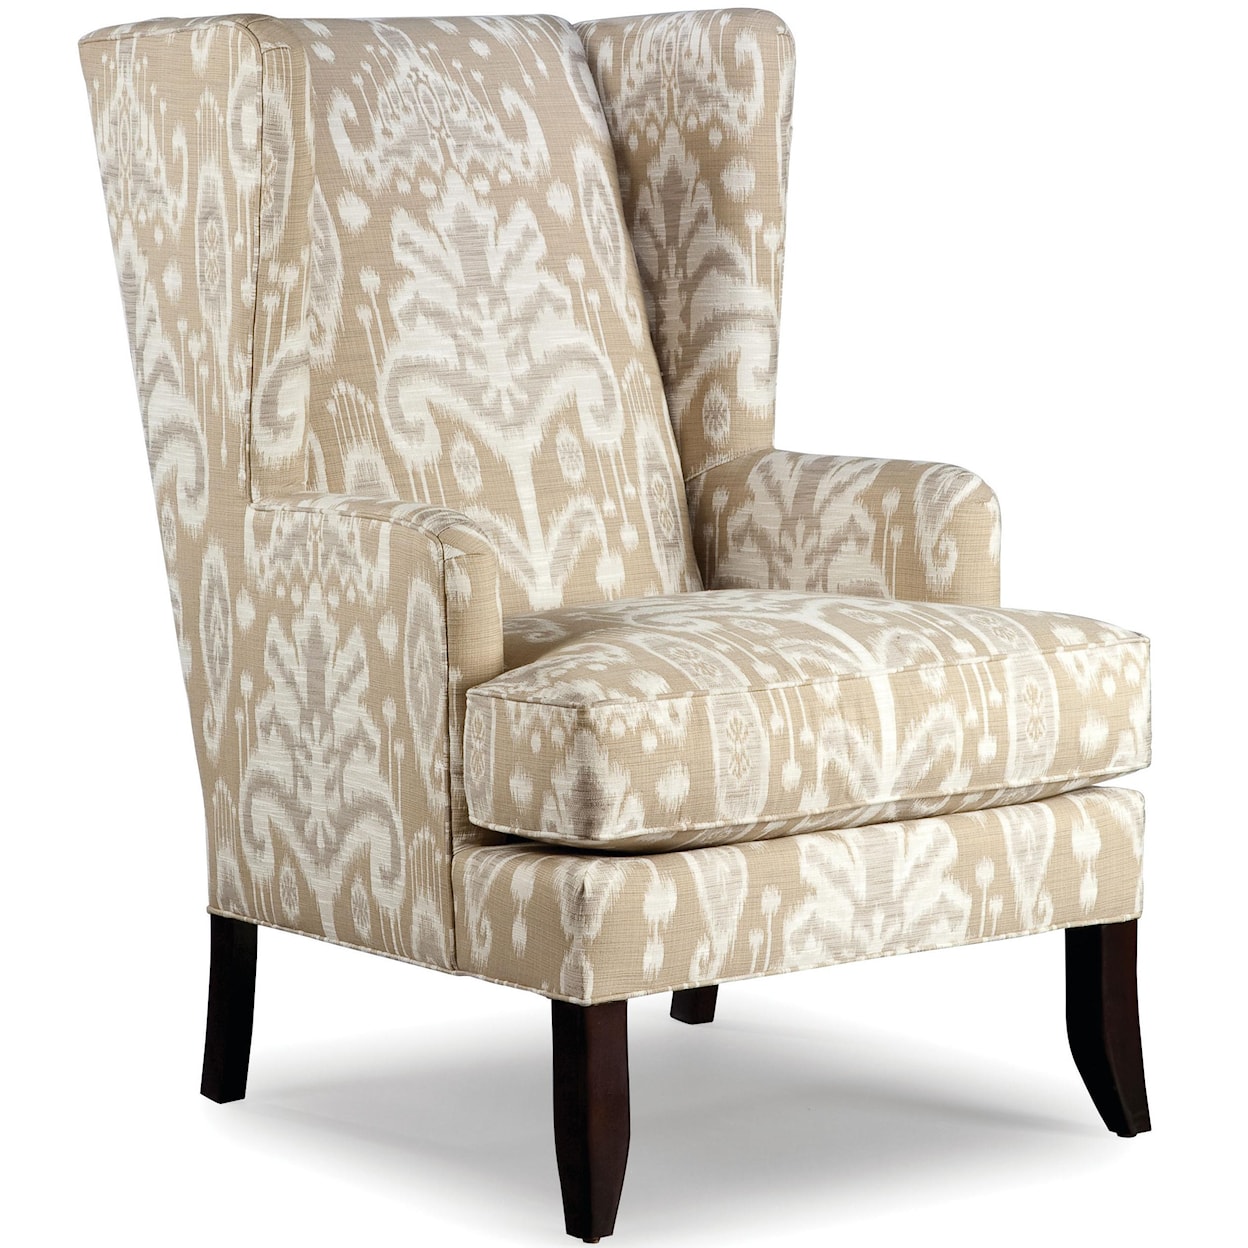 Fairfield Chairs Wing Chair